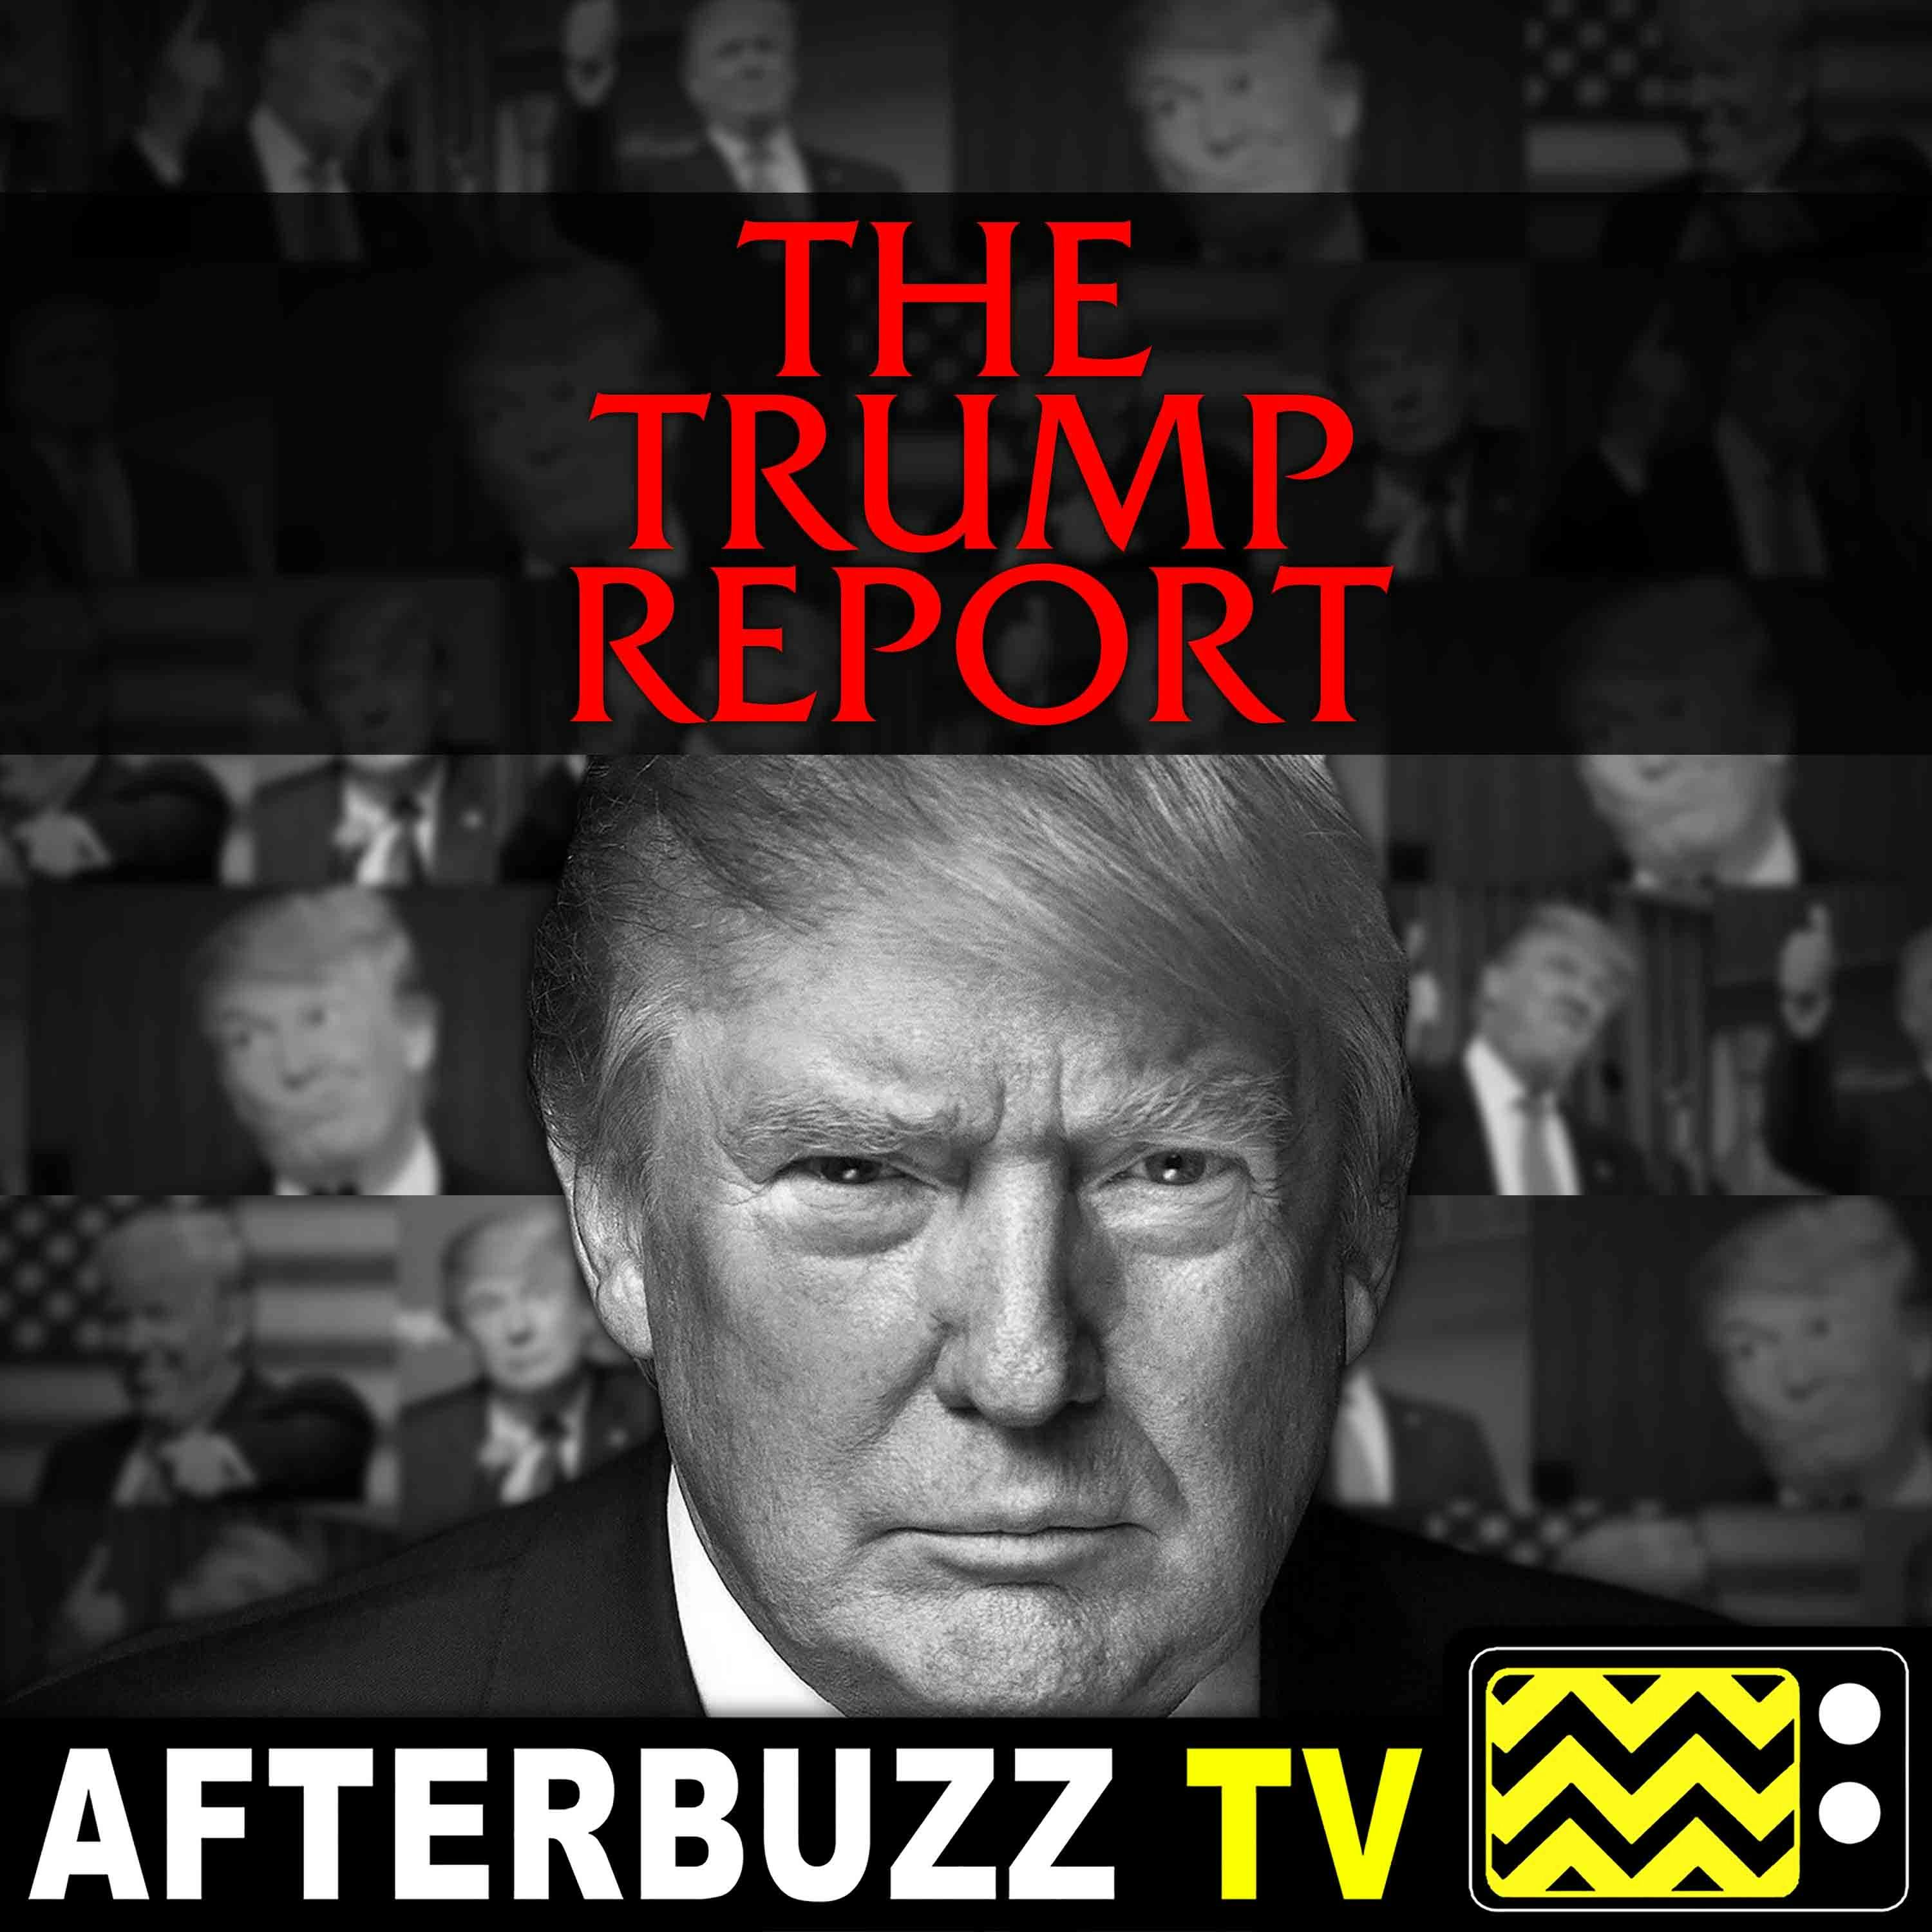 Are You Ready For Some Football? – Trump vs. Hillary | AfterBuzz TV AfterShow